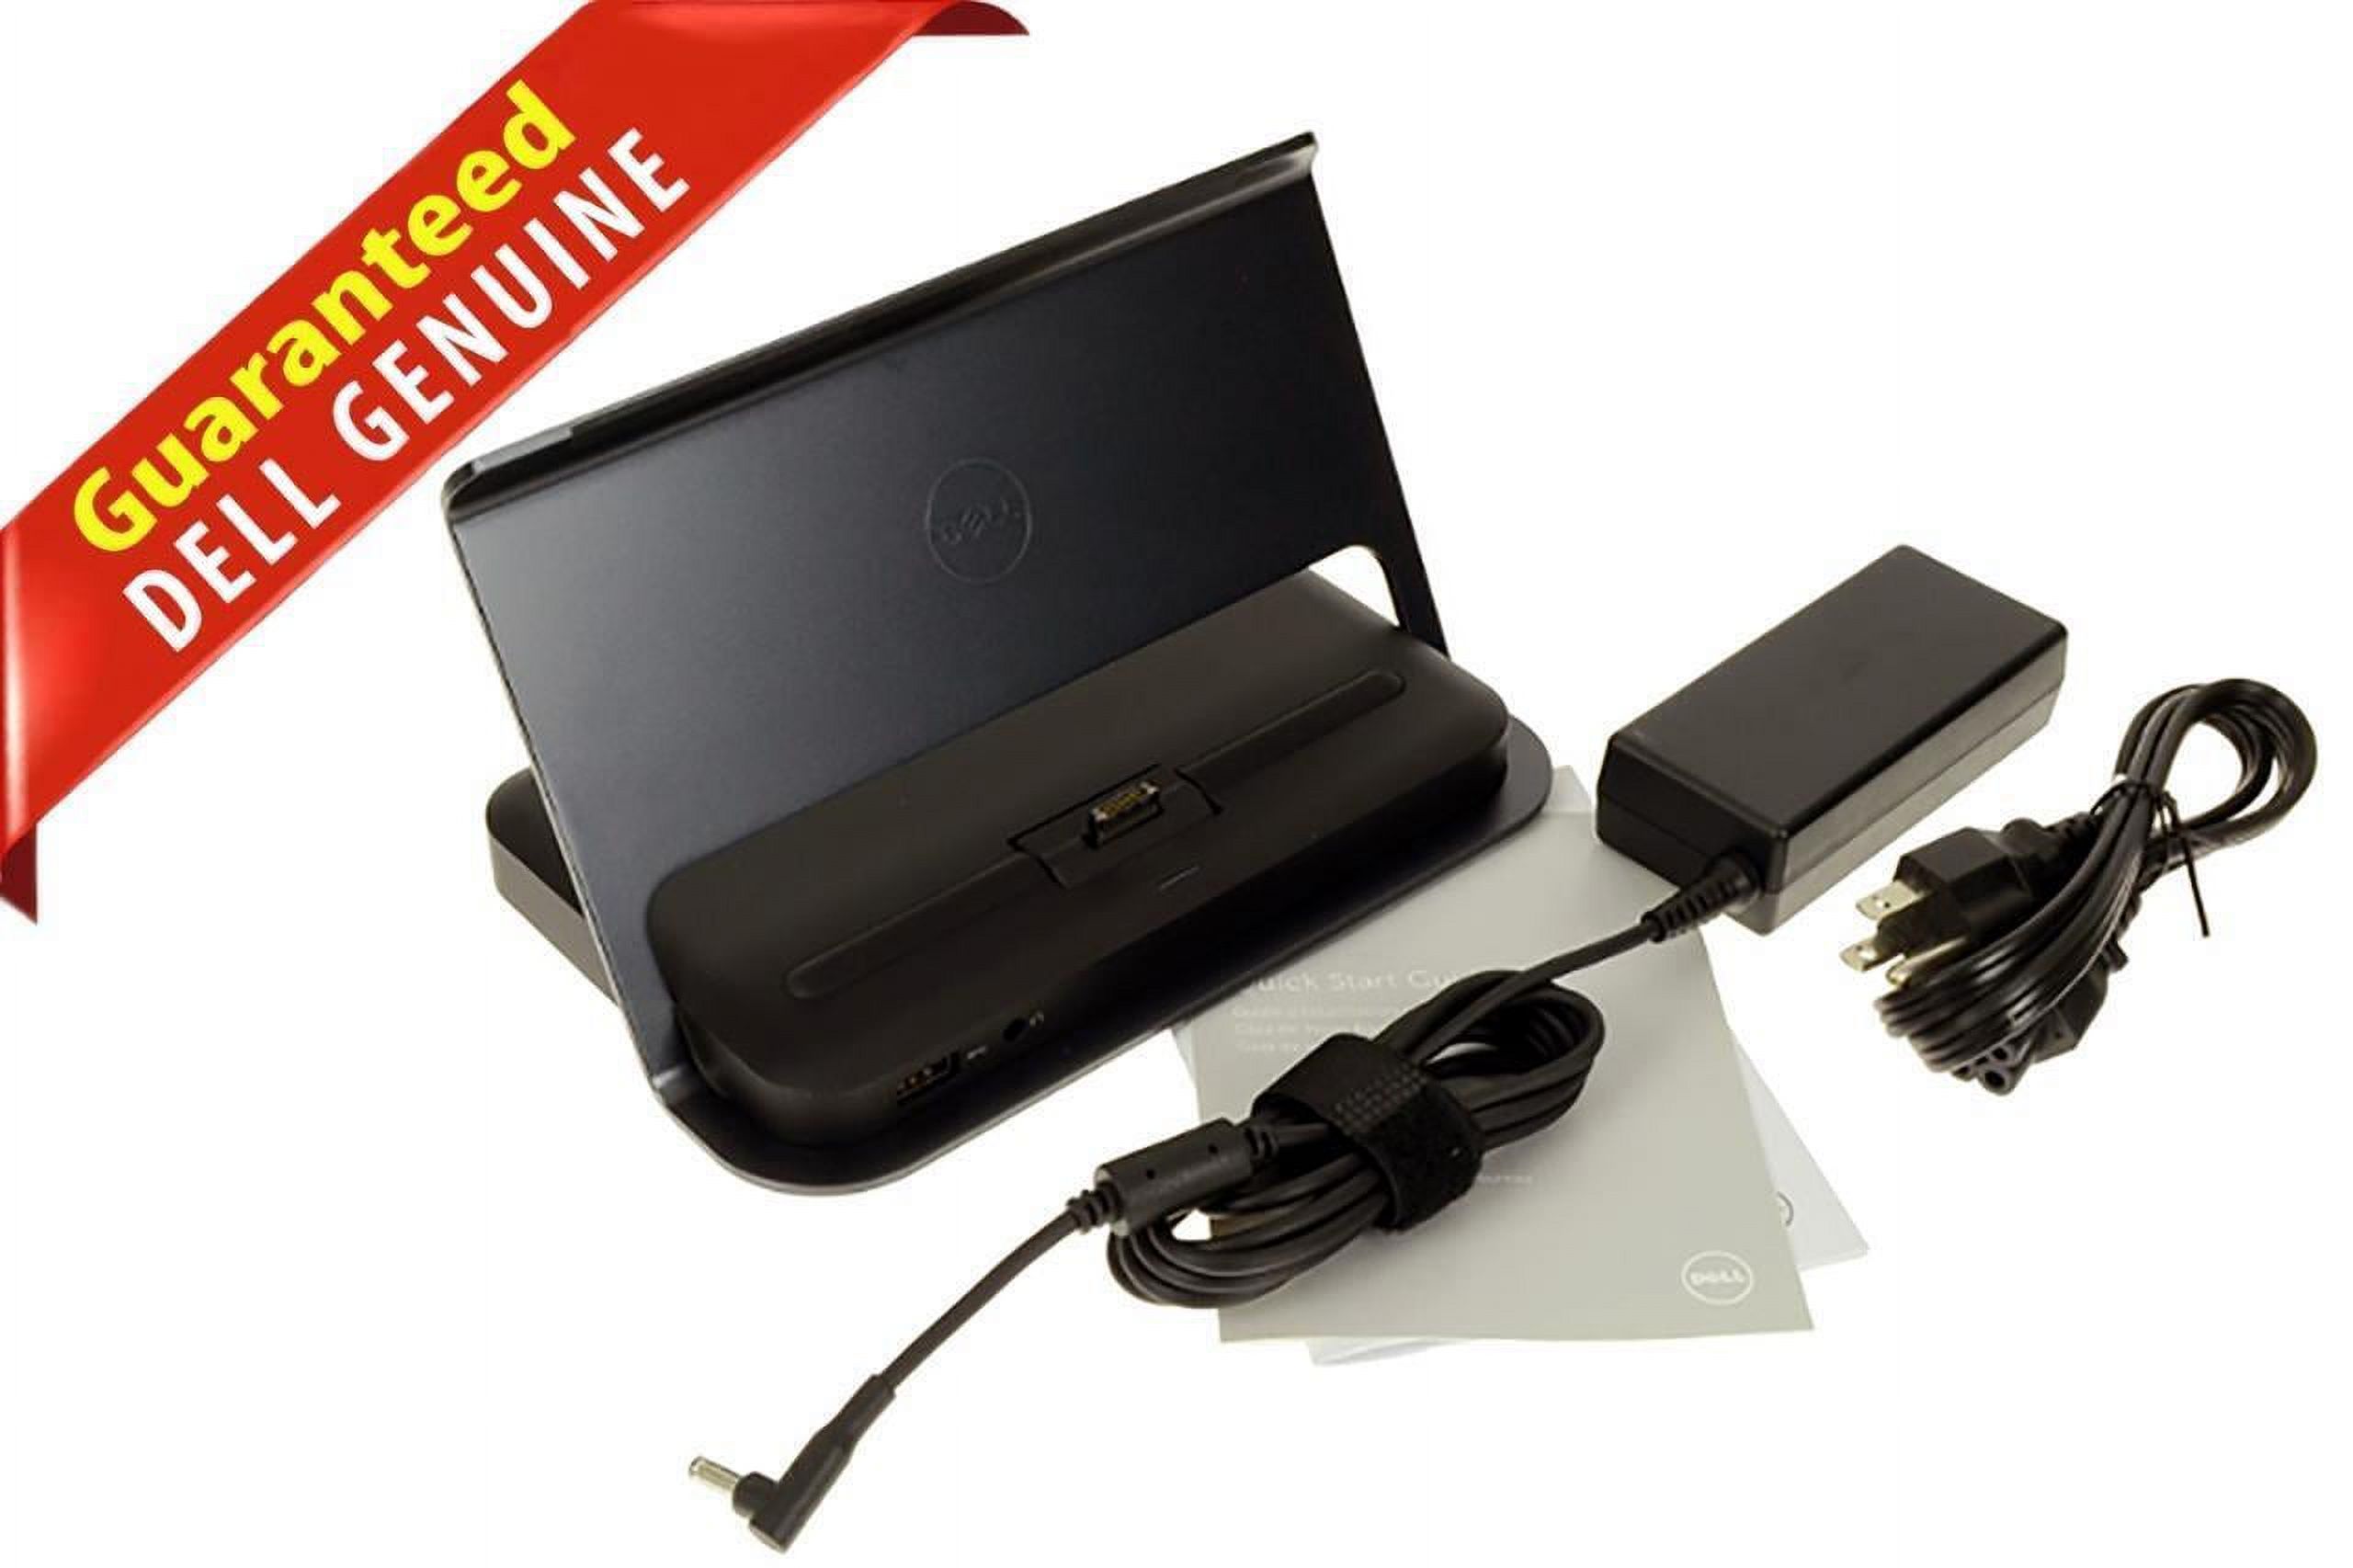 Pre-Owned Dell K10A Venue 11 Pro 5130 7130 7139 7140 Series Tablet Docking Station MPT52 ( Like New) - image 1 of 7